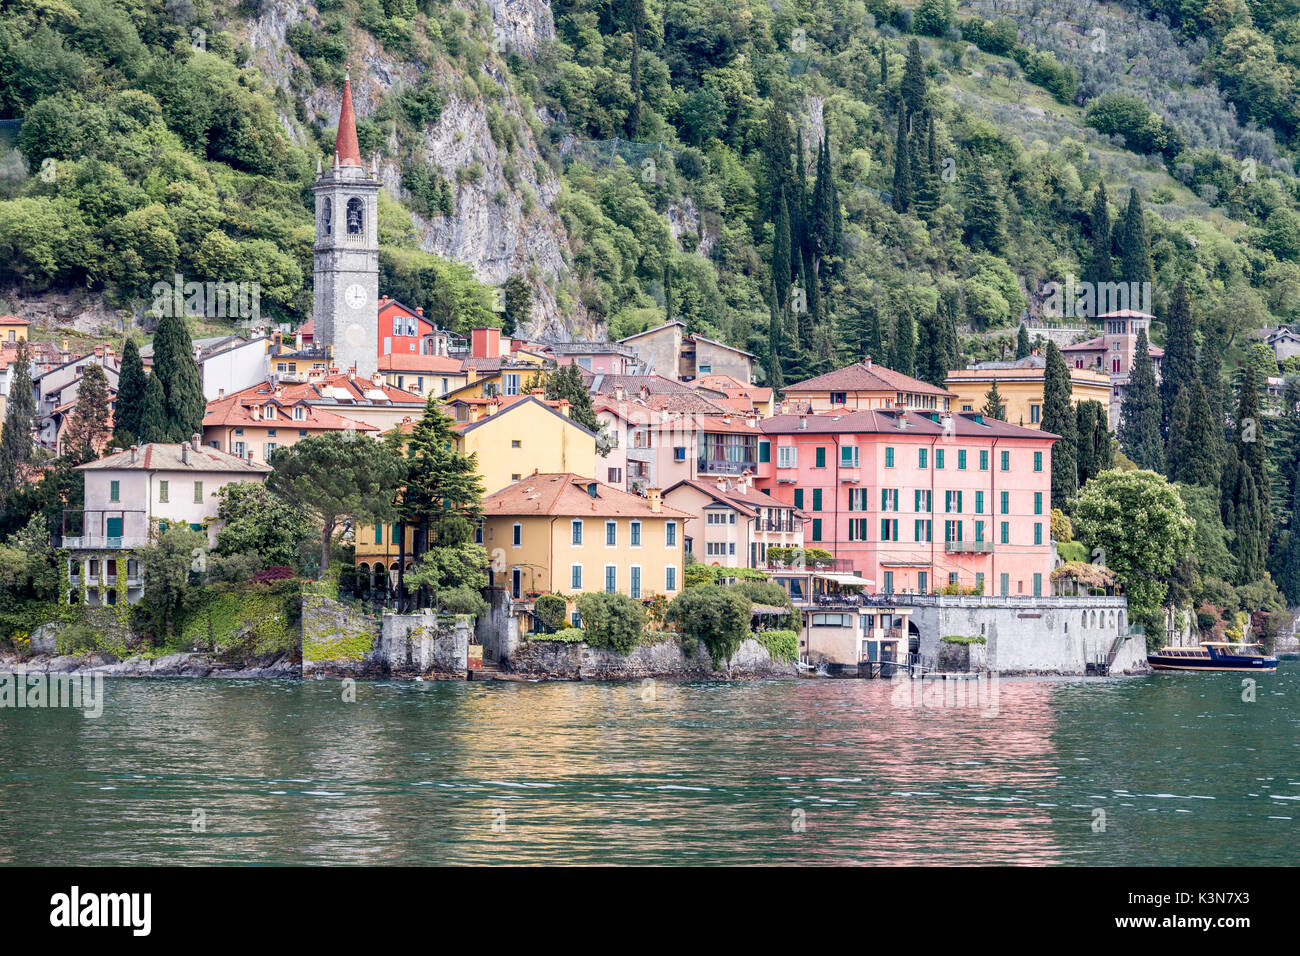 The little town of Varenna, Lake Como, Lombardy, Italy. Stock Photo